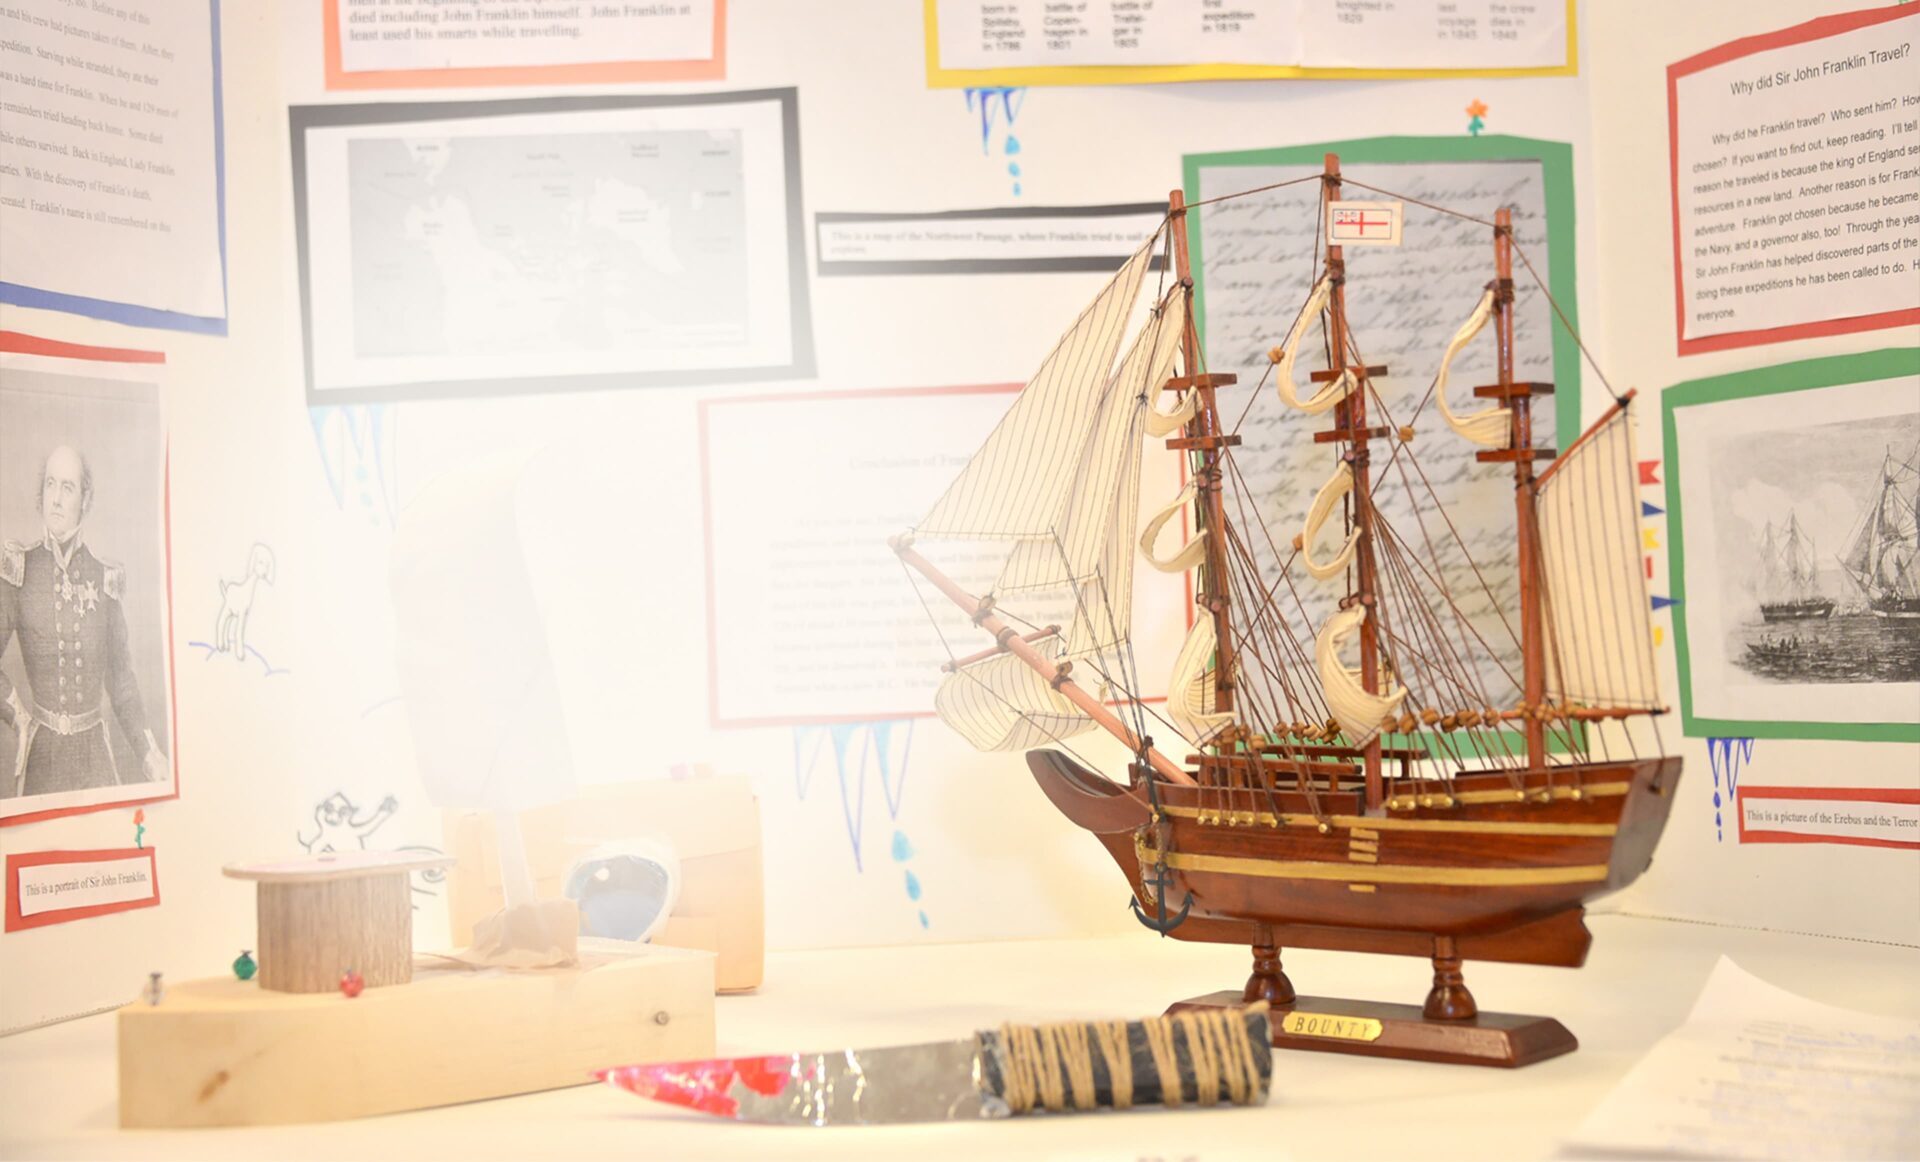 Photo showing a model ship, picture of a soldier on the left and picture of ships of the right